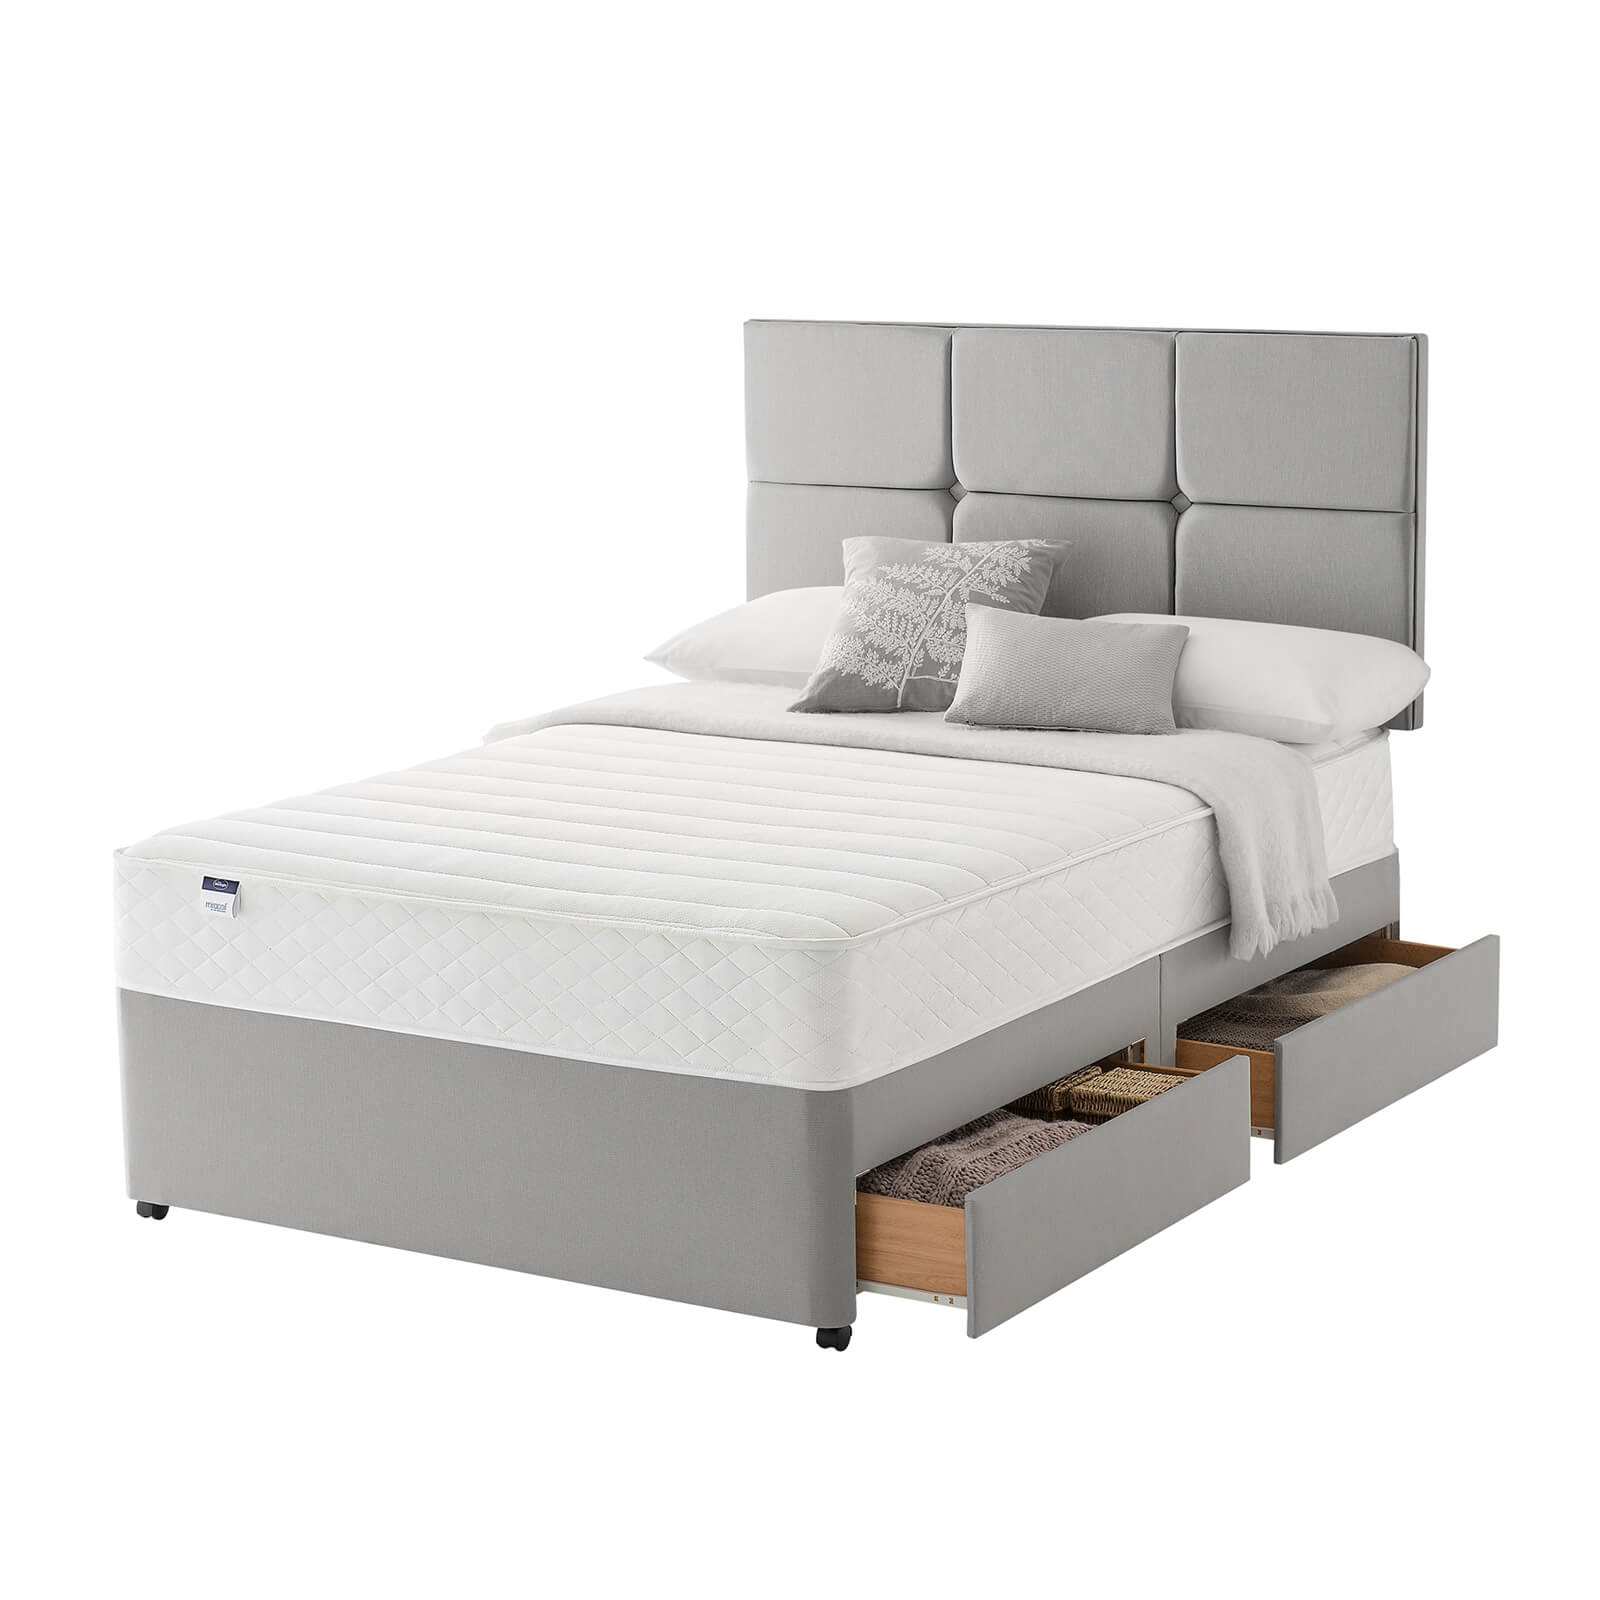 Silentnight Miracoil Memory 4 Drawer Divan Bed - Slate Grey - Double